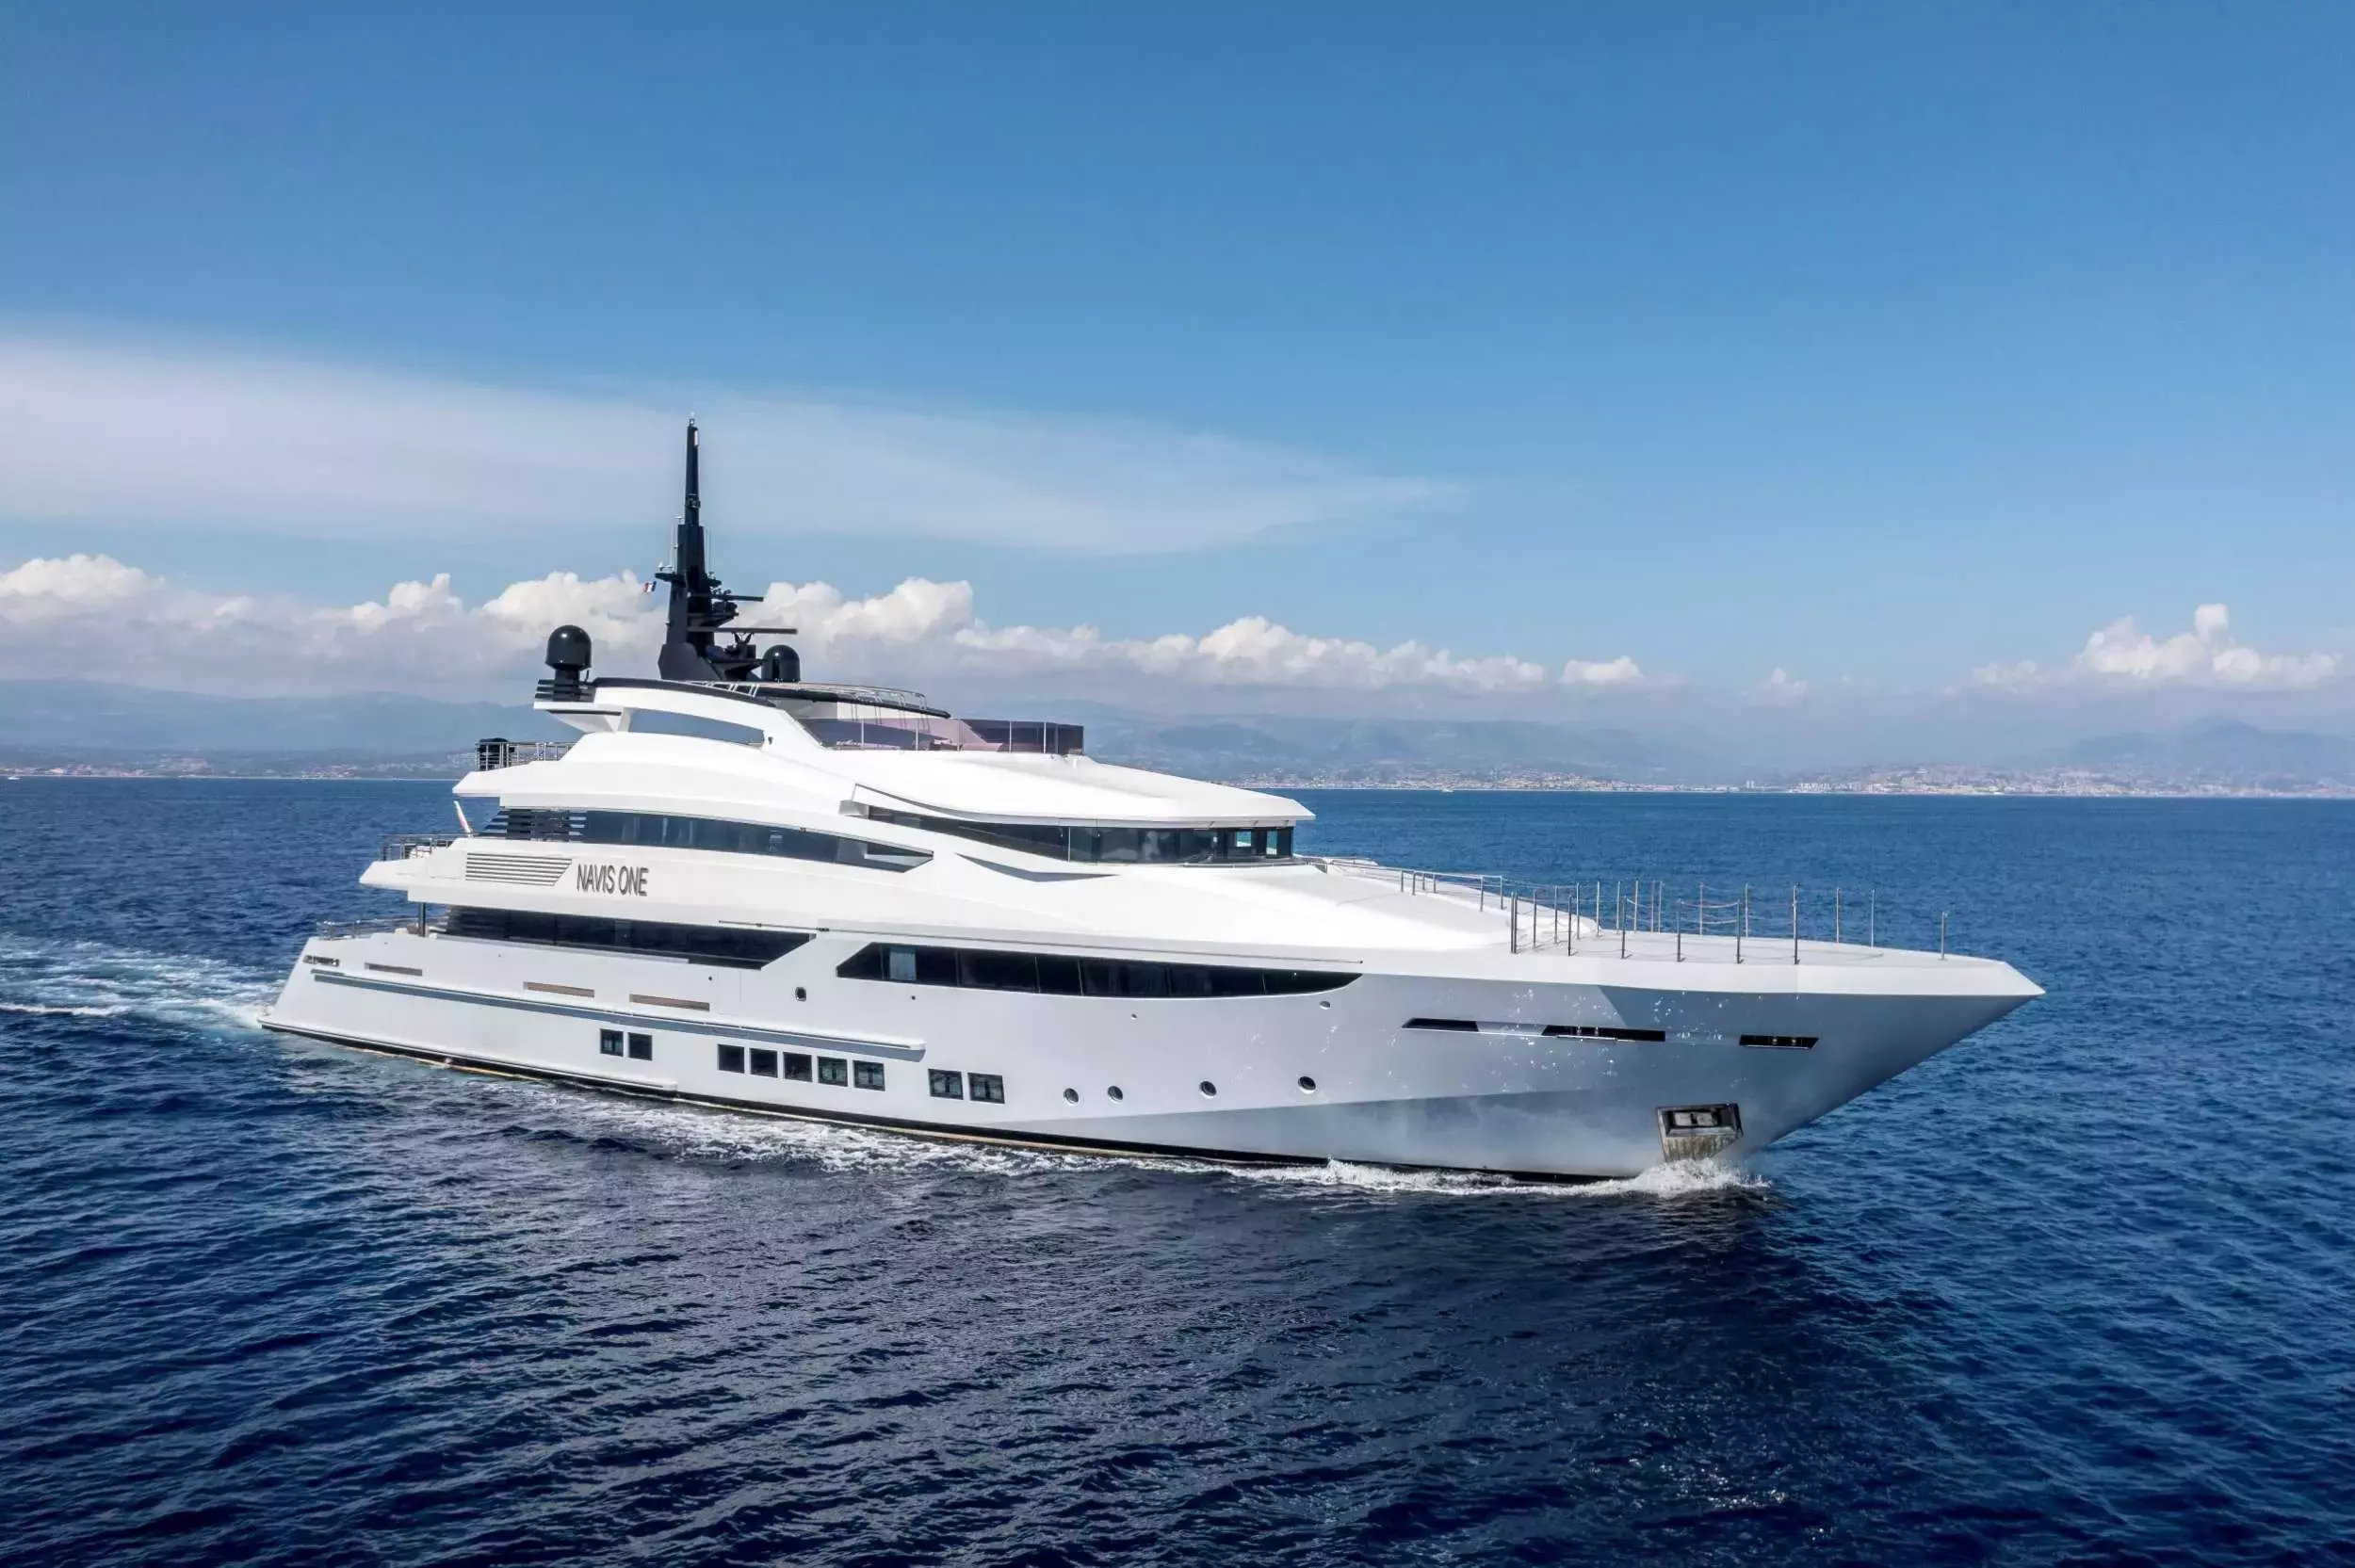 Navis One by Gentech - Top rates for a Charter of a private Superyacht in Maldives